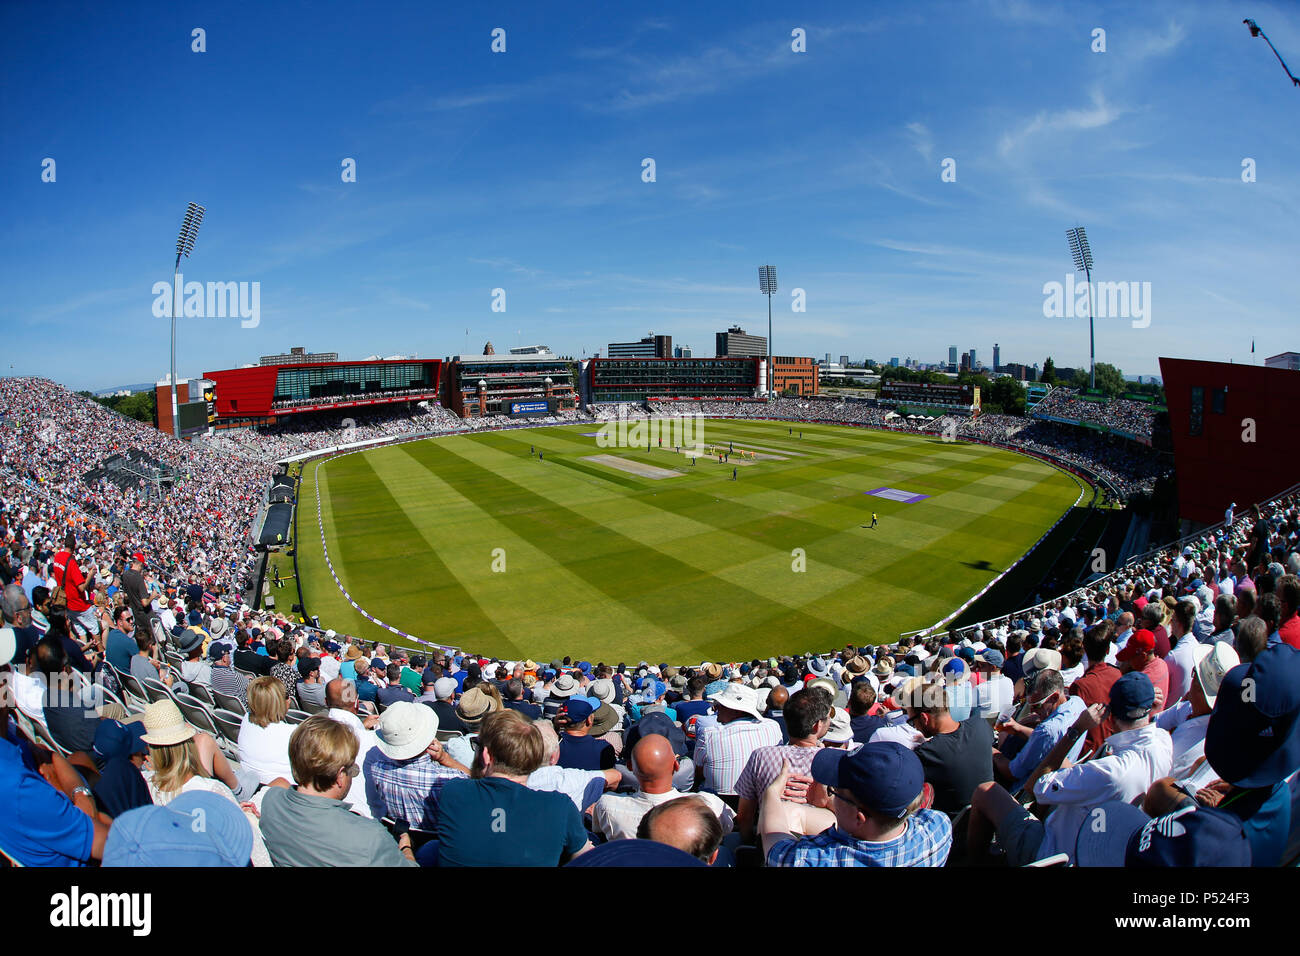 Manchester, UK. 24th June, 2018. Manchester, UK. 24th June, 2018. Sunday 24th June 2018, Emirates Old Trafford, 5th ODI Royal London One-Day Series England v Australia; General stadium view showing a capacity crowd watching Australia bat during the 1st innings against England. Credit: News Images /Alamy Live News Credit: News Images /Alamy Live News Stock Photo